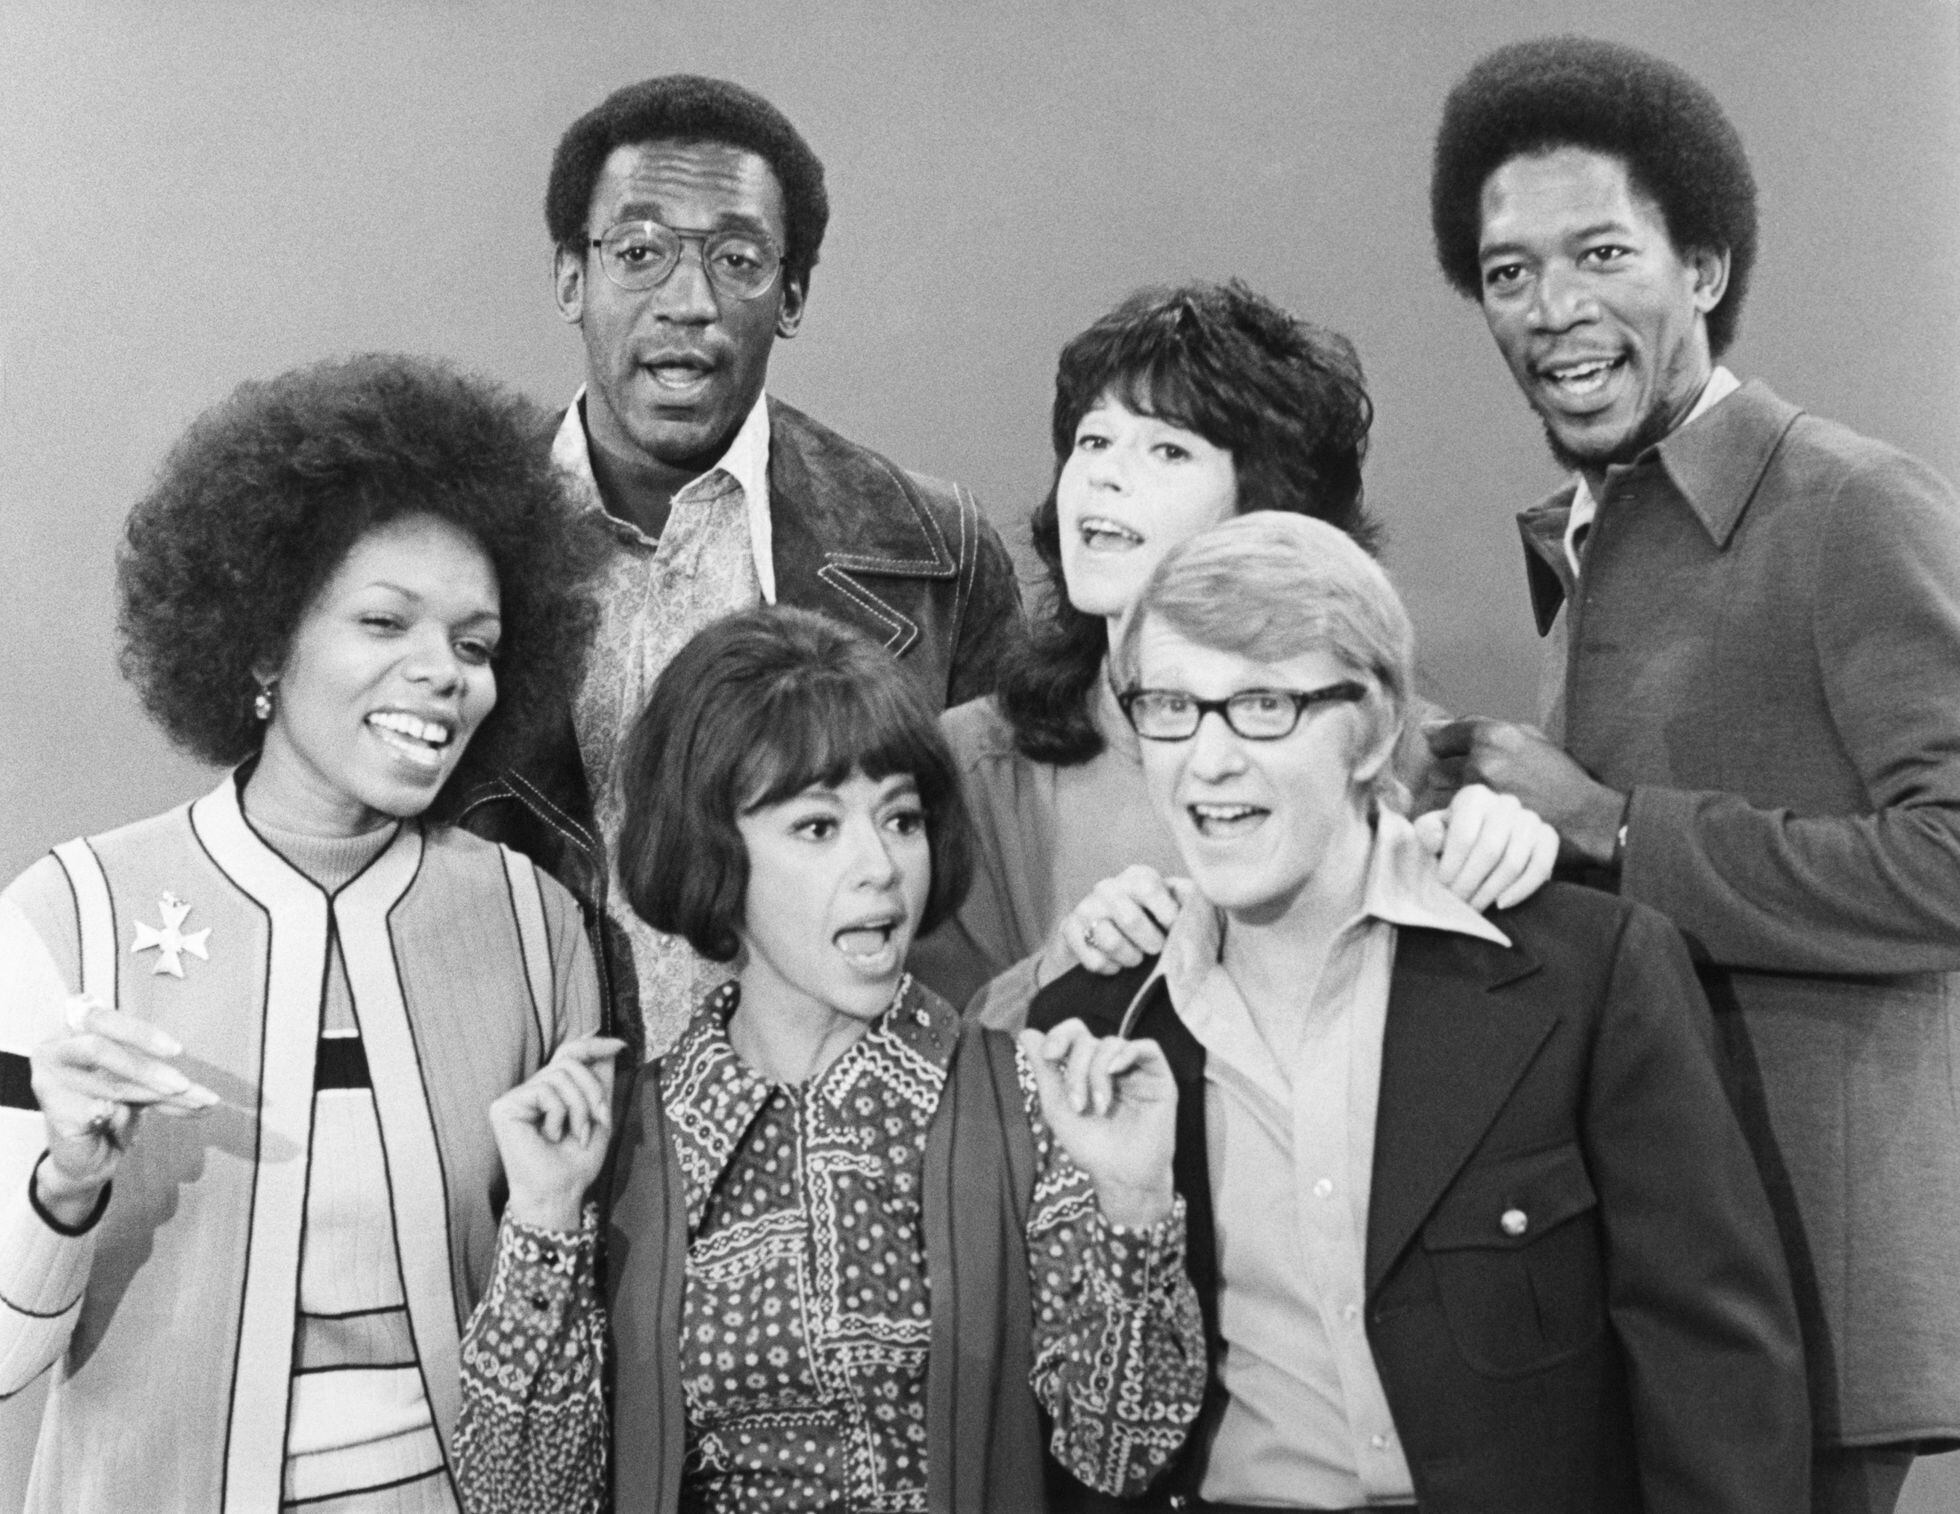 The cast of 'The Electric Company' educational children's television series, including Bill Cosby (back left), Rita Moreno (front center), and Morgan Freeman (right). BETTMANN (BETTMANN ARCHIVE)